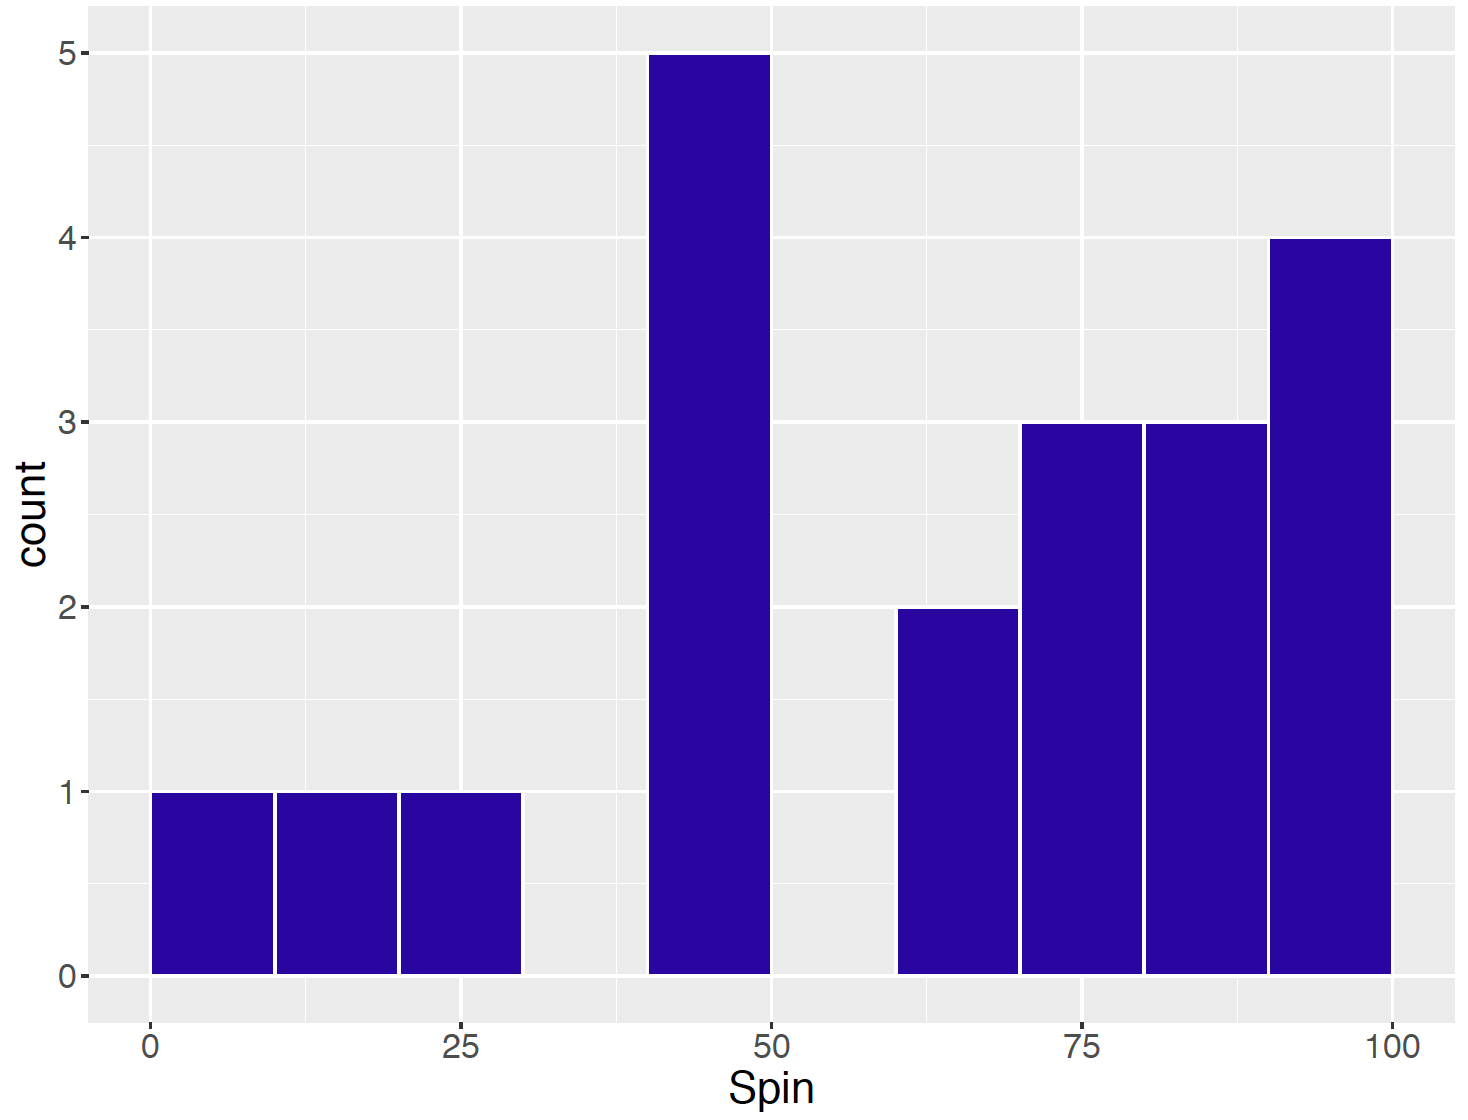 Histogram of 20 simulated values of a spinner.